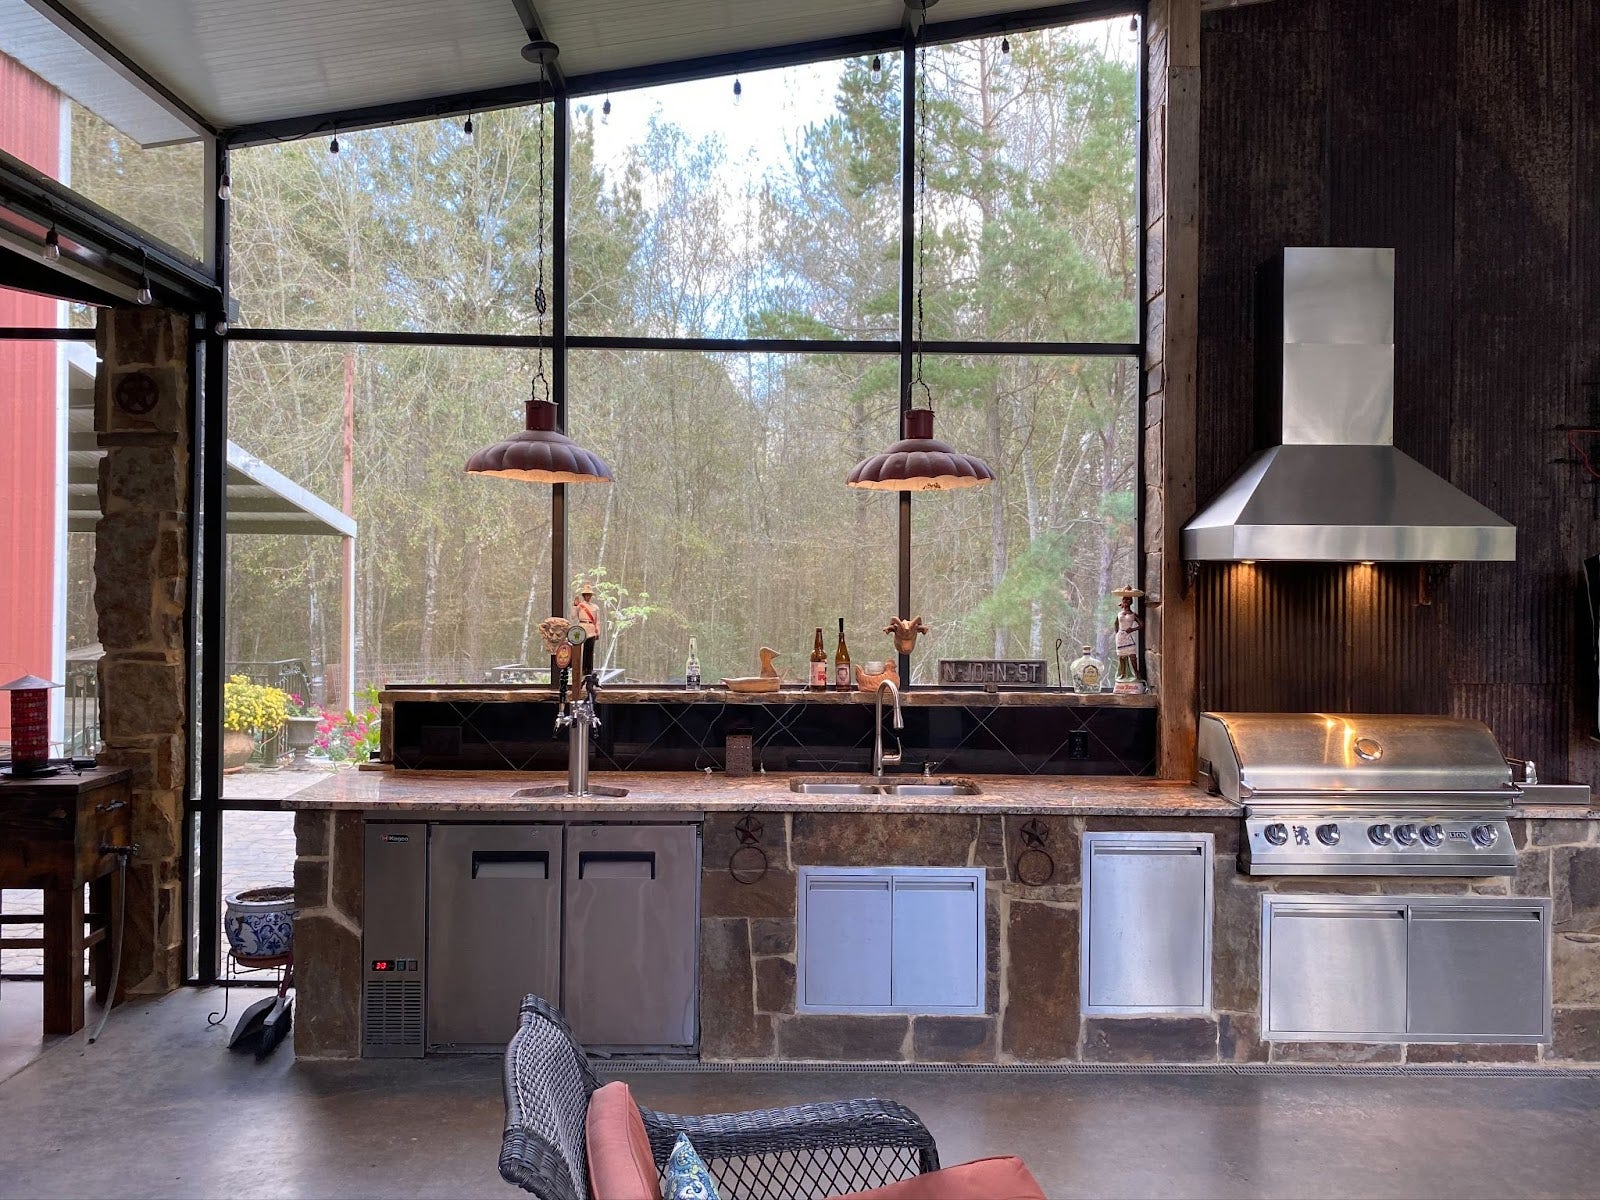 A semi-outdoor kitchen combining industrial style with rustic elements. Stainless steel range hood contrasts with wood and stone. Large screened windows offer a view of the outdoors. Spacious layout with ambient lighting is ideal for gatherings. - Proline Range Hoods - prolinerangehoods.com 